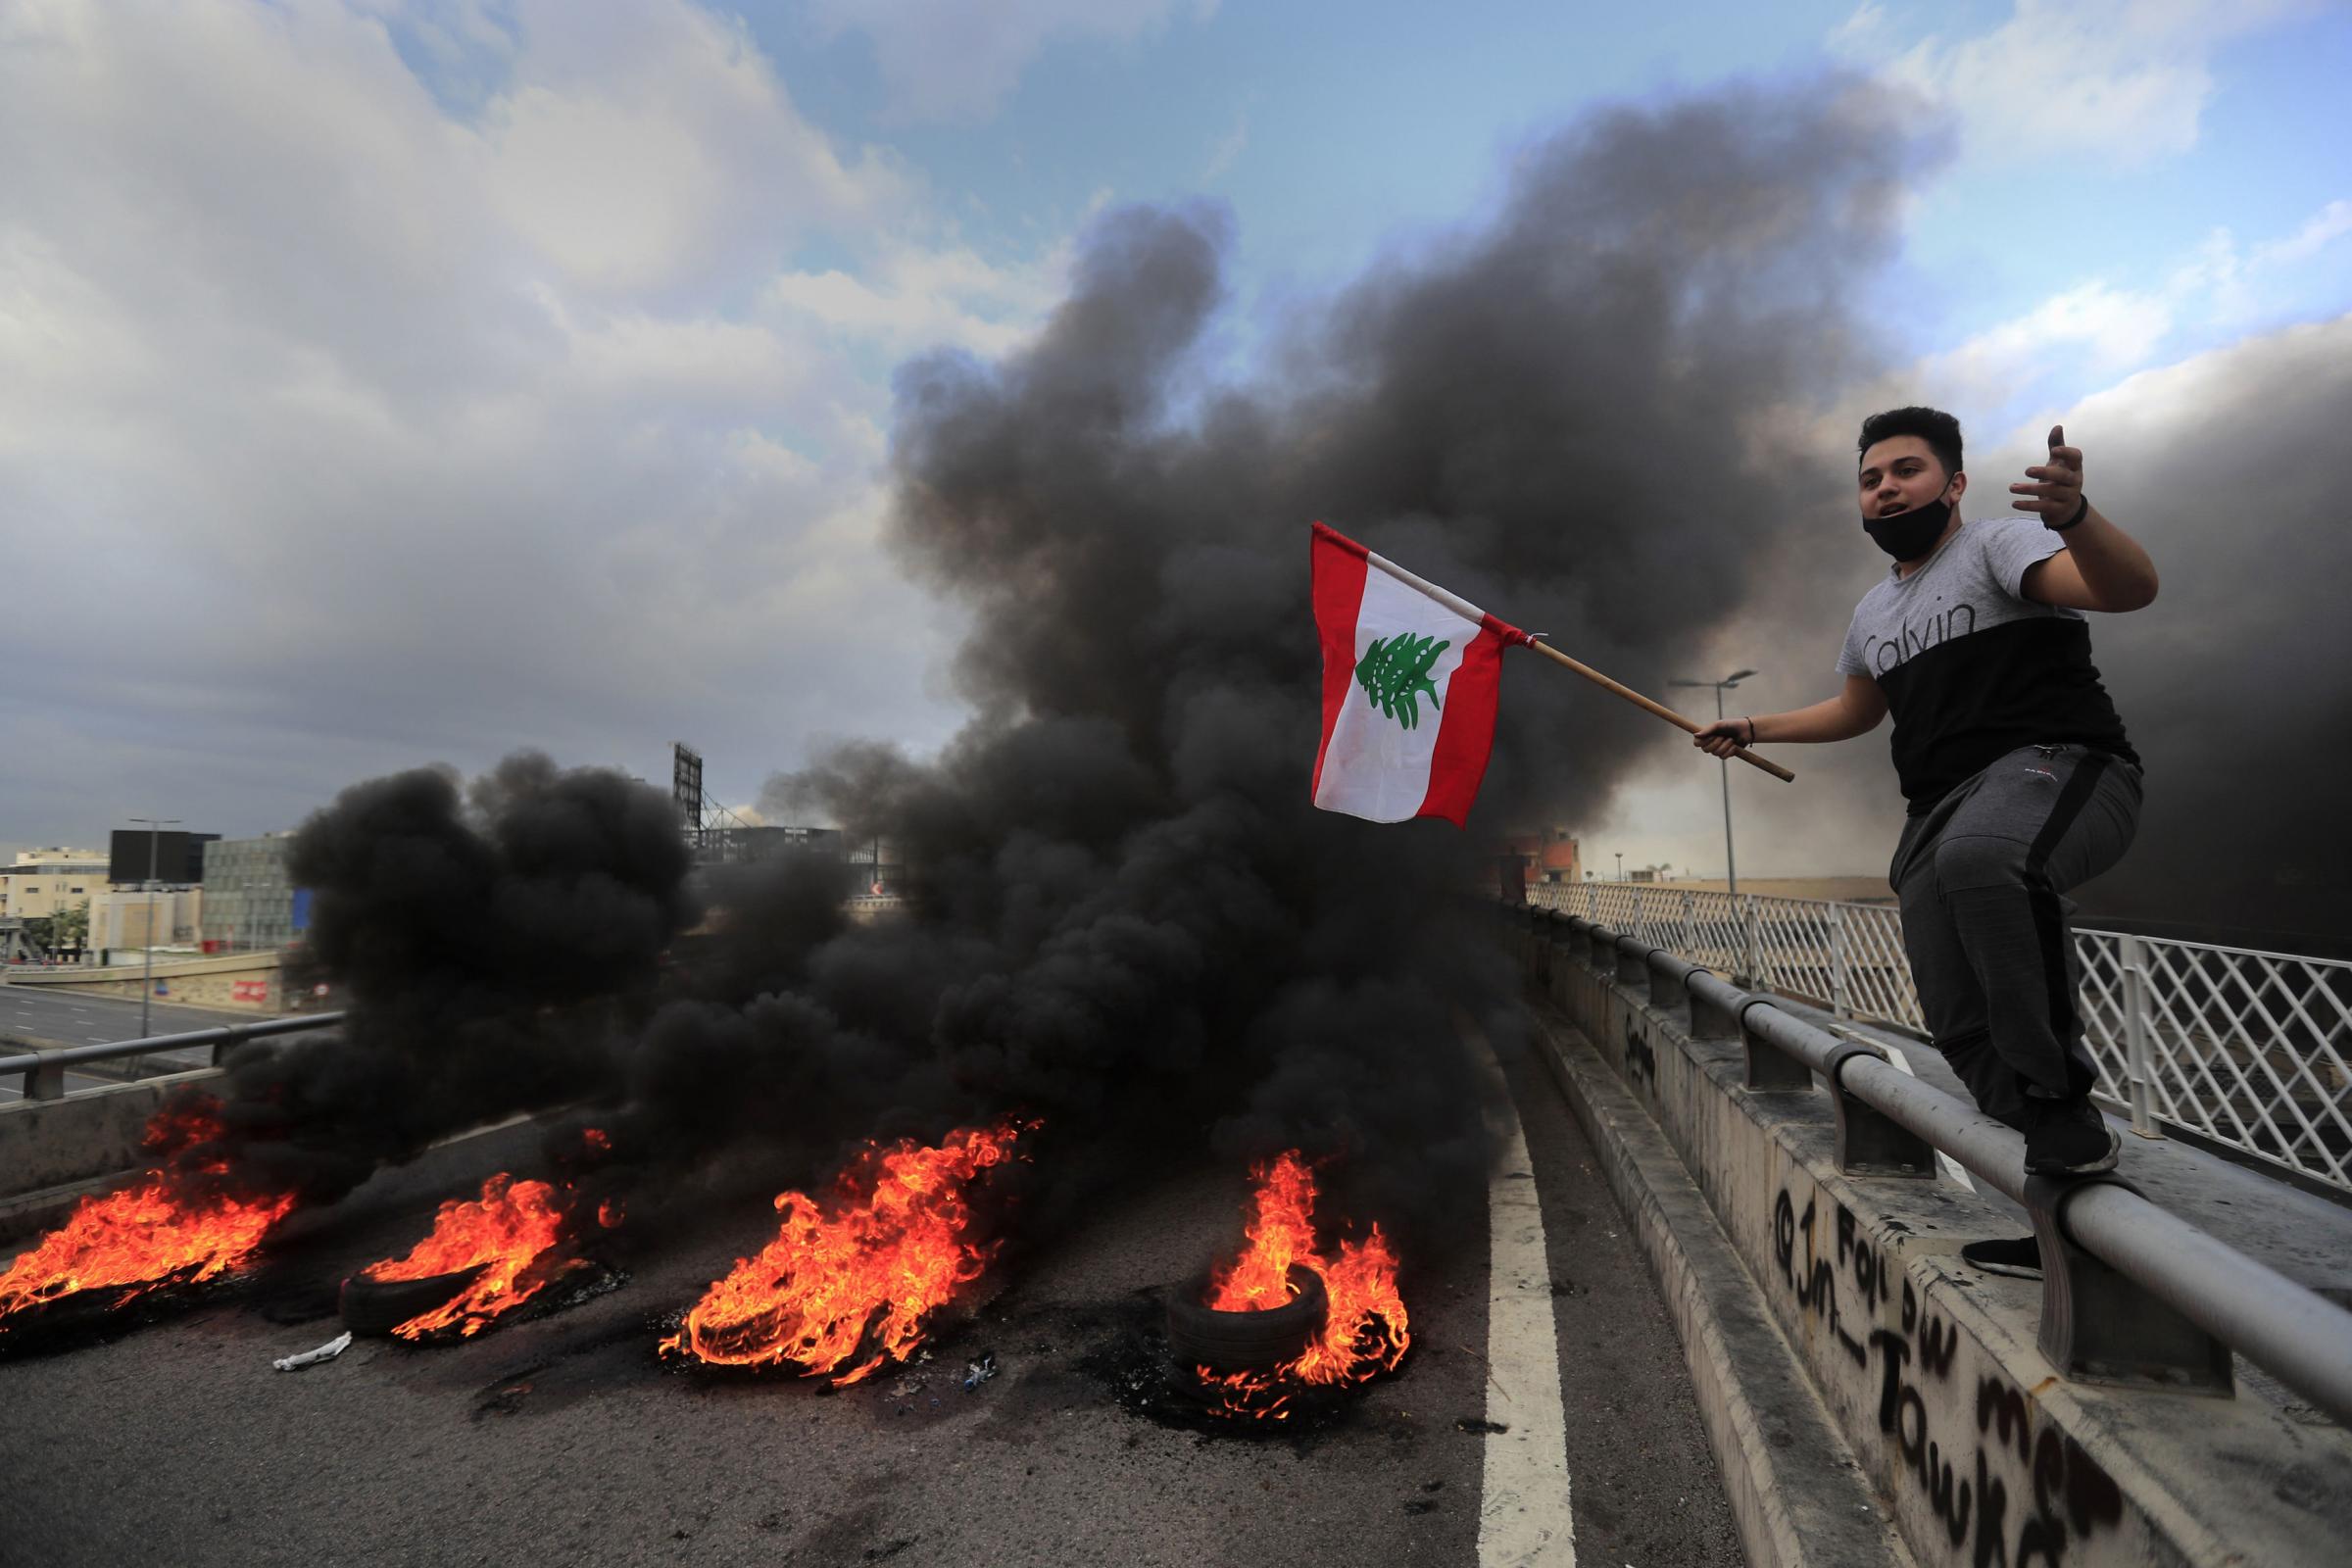 A protestor waves a Lebanese flag near burning tires set to block a main highway, during a protest in the town of Jal el-Dib, north of Beirut, Lebanon Picture: HUSSEIN MALLA/AP